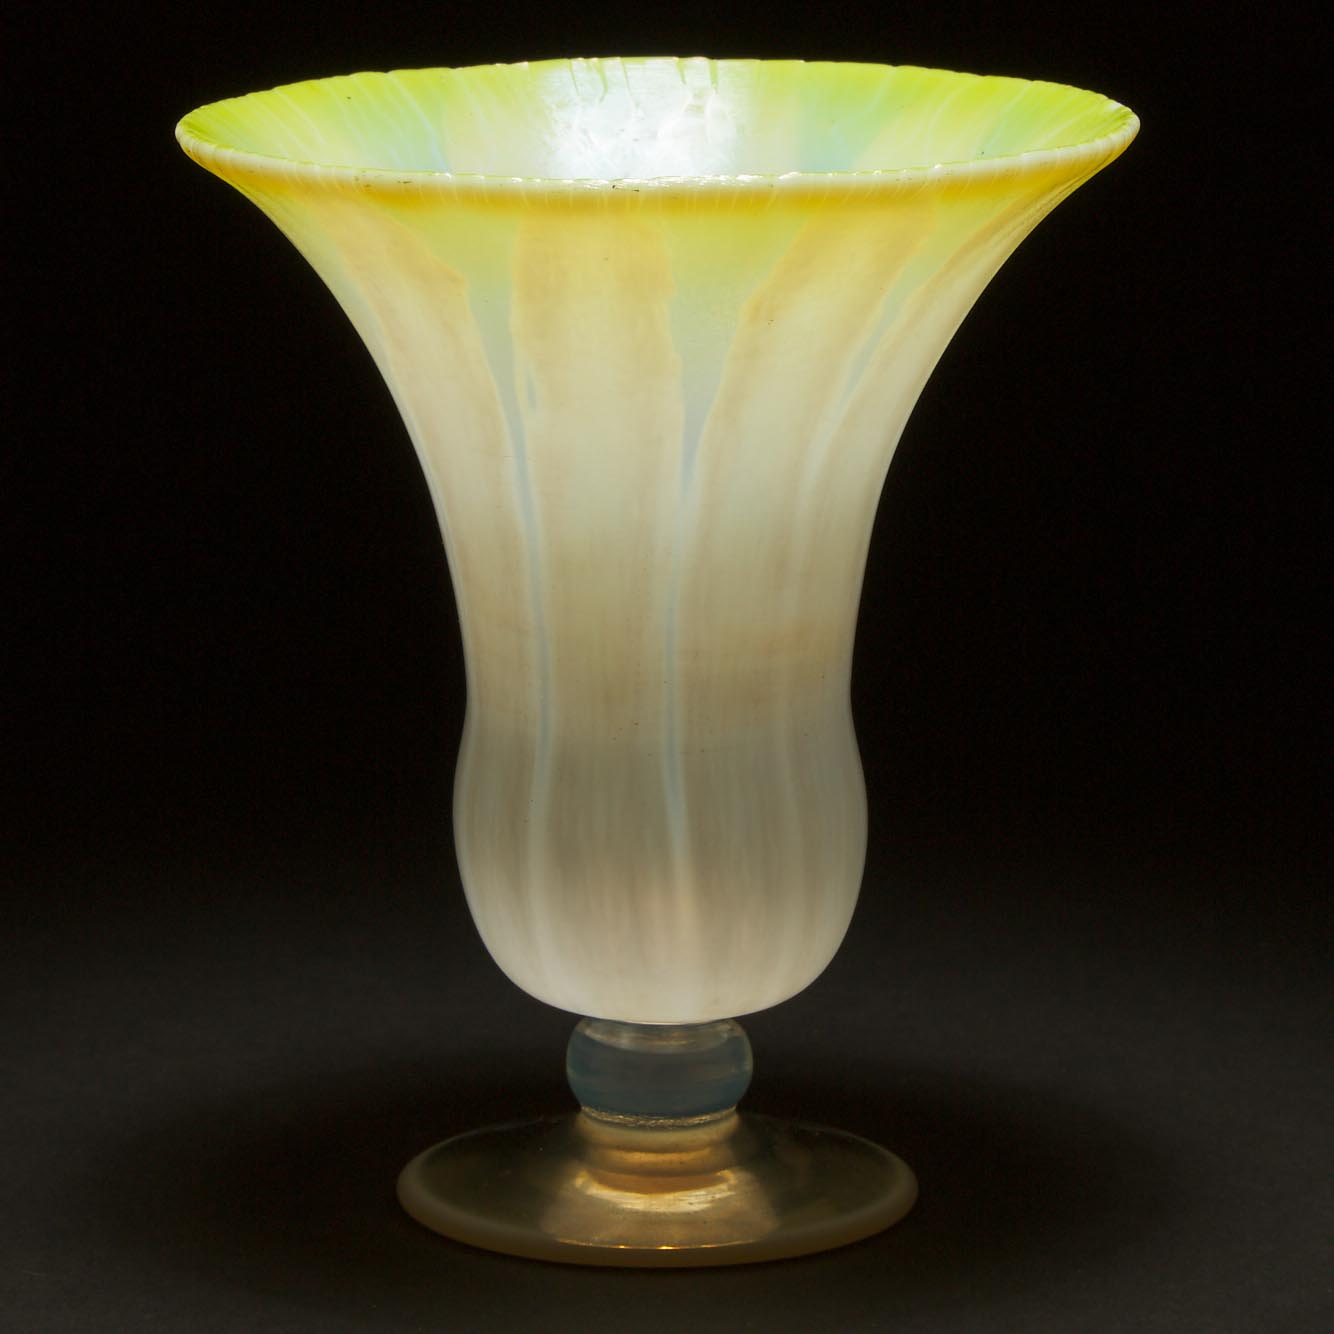 Tiffany ‘Favrile’ Iridescent Glass Floriform Vase, early 20th century